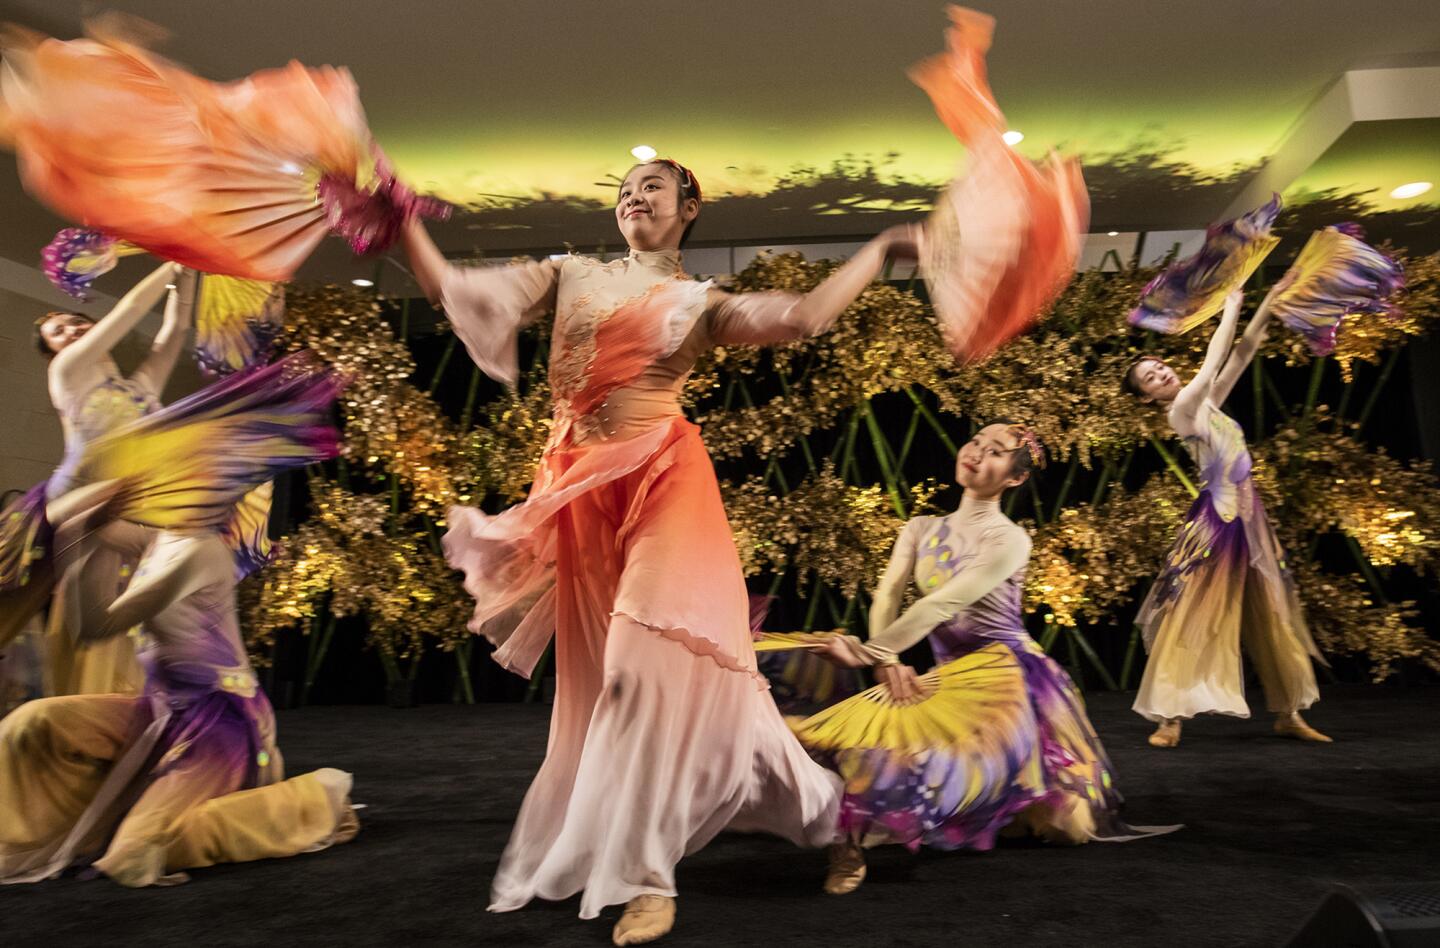 Dancers from the Zhejiang Conservatory of Music perform Thursday during the launch of South Coast Plaza's Lunar New Year celebration, which runs through Feb. 18.